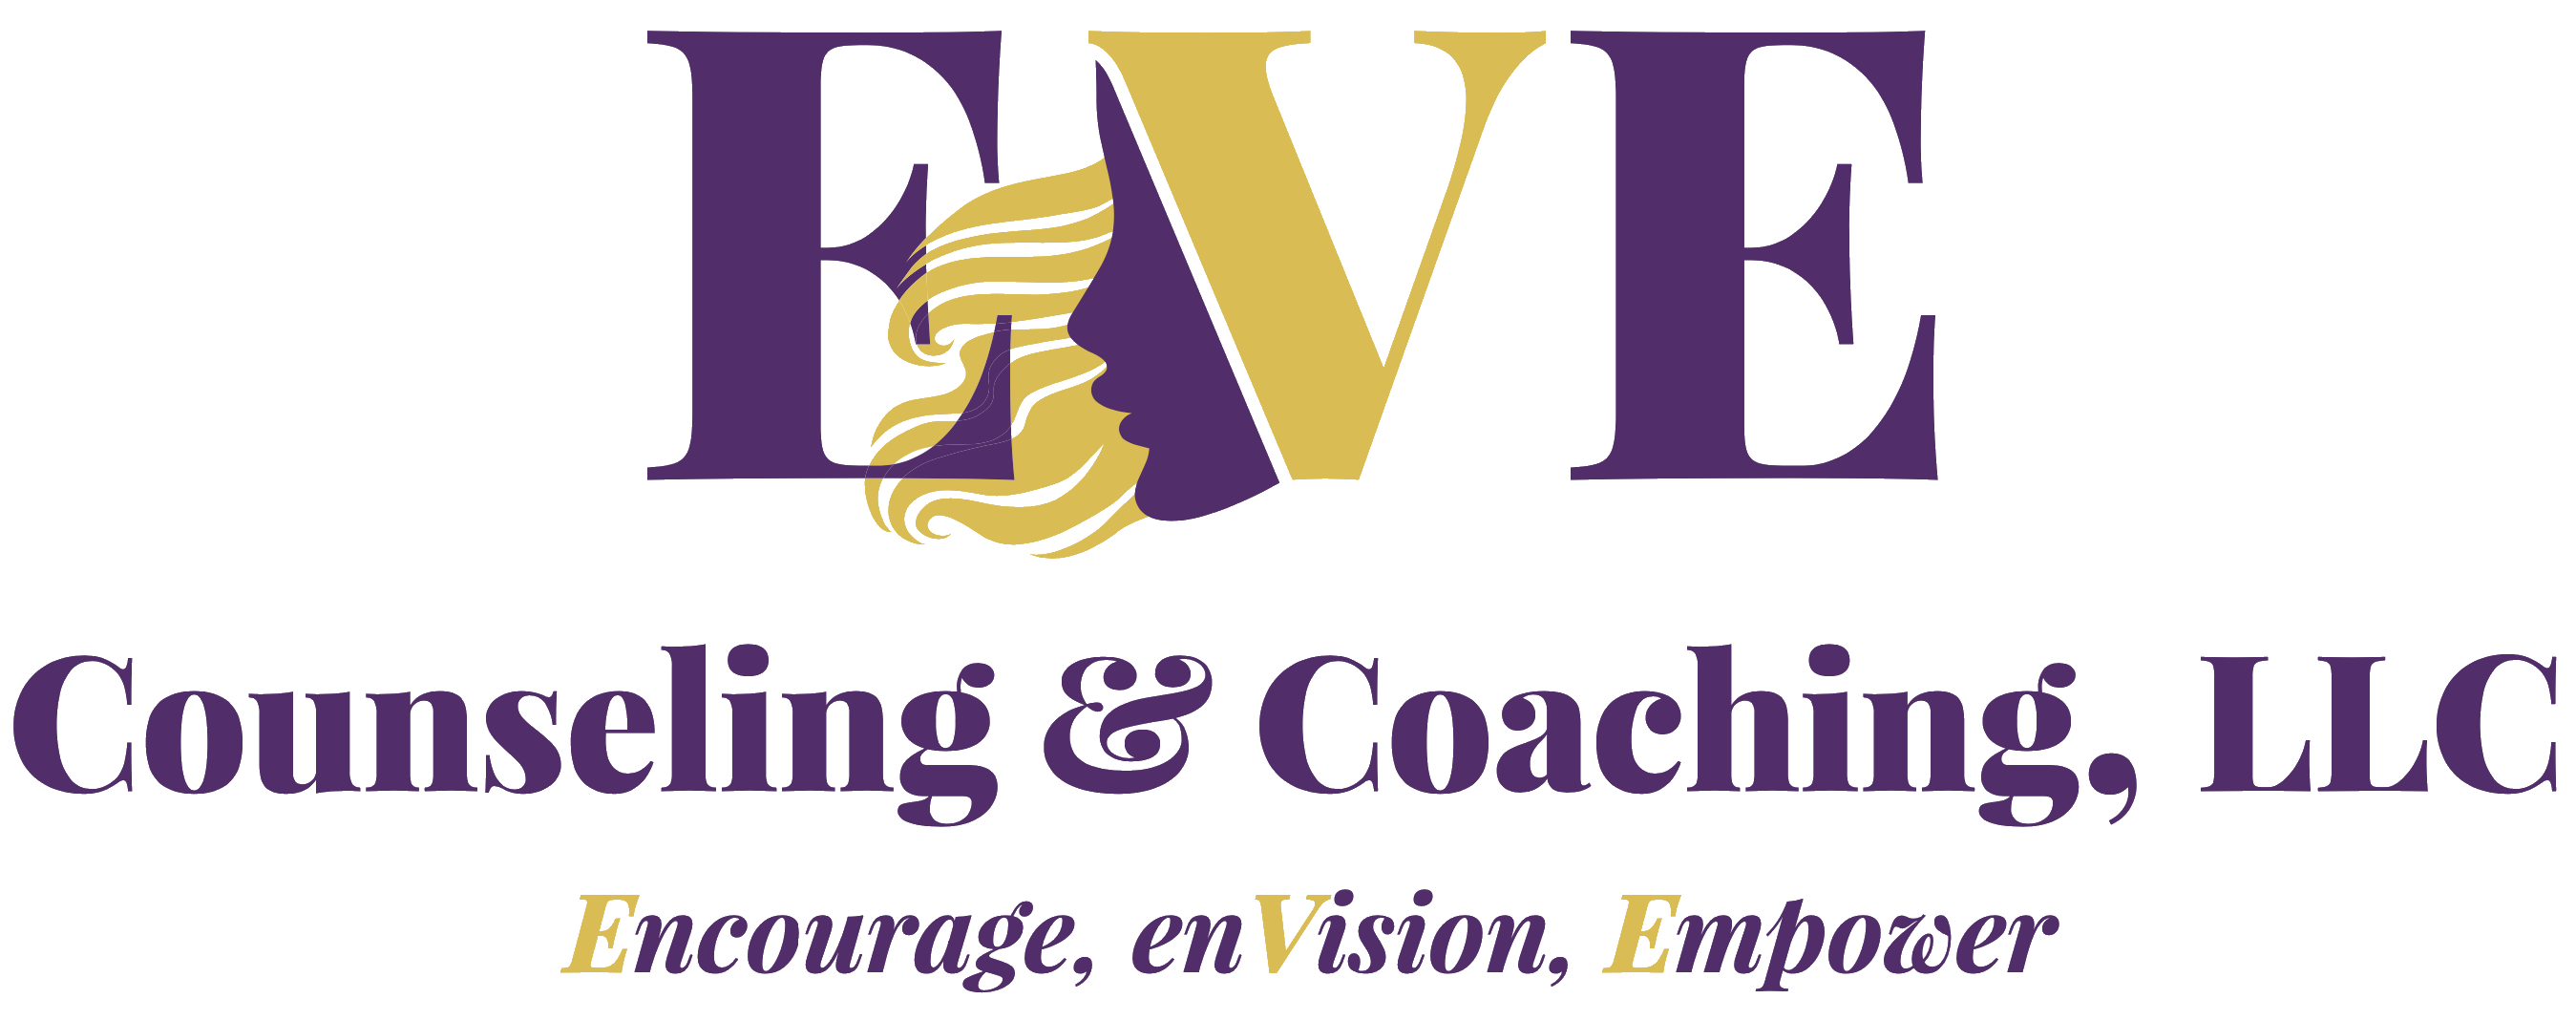 Eve Counseling, Coaching and Weight Loss Programs Logo